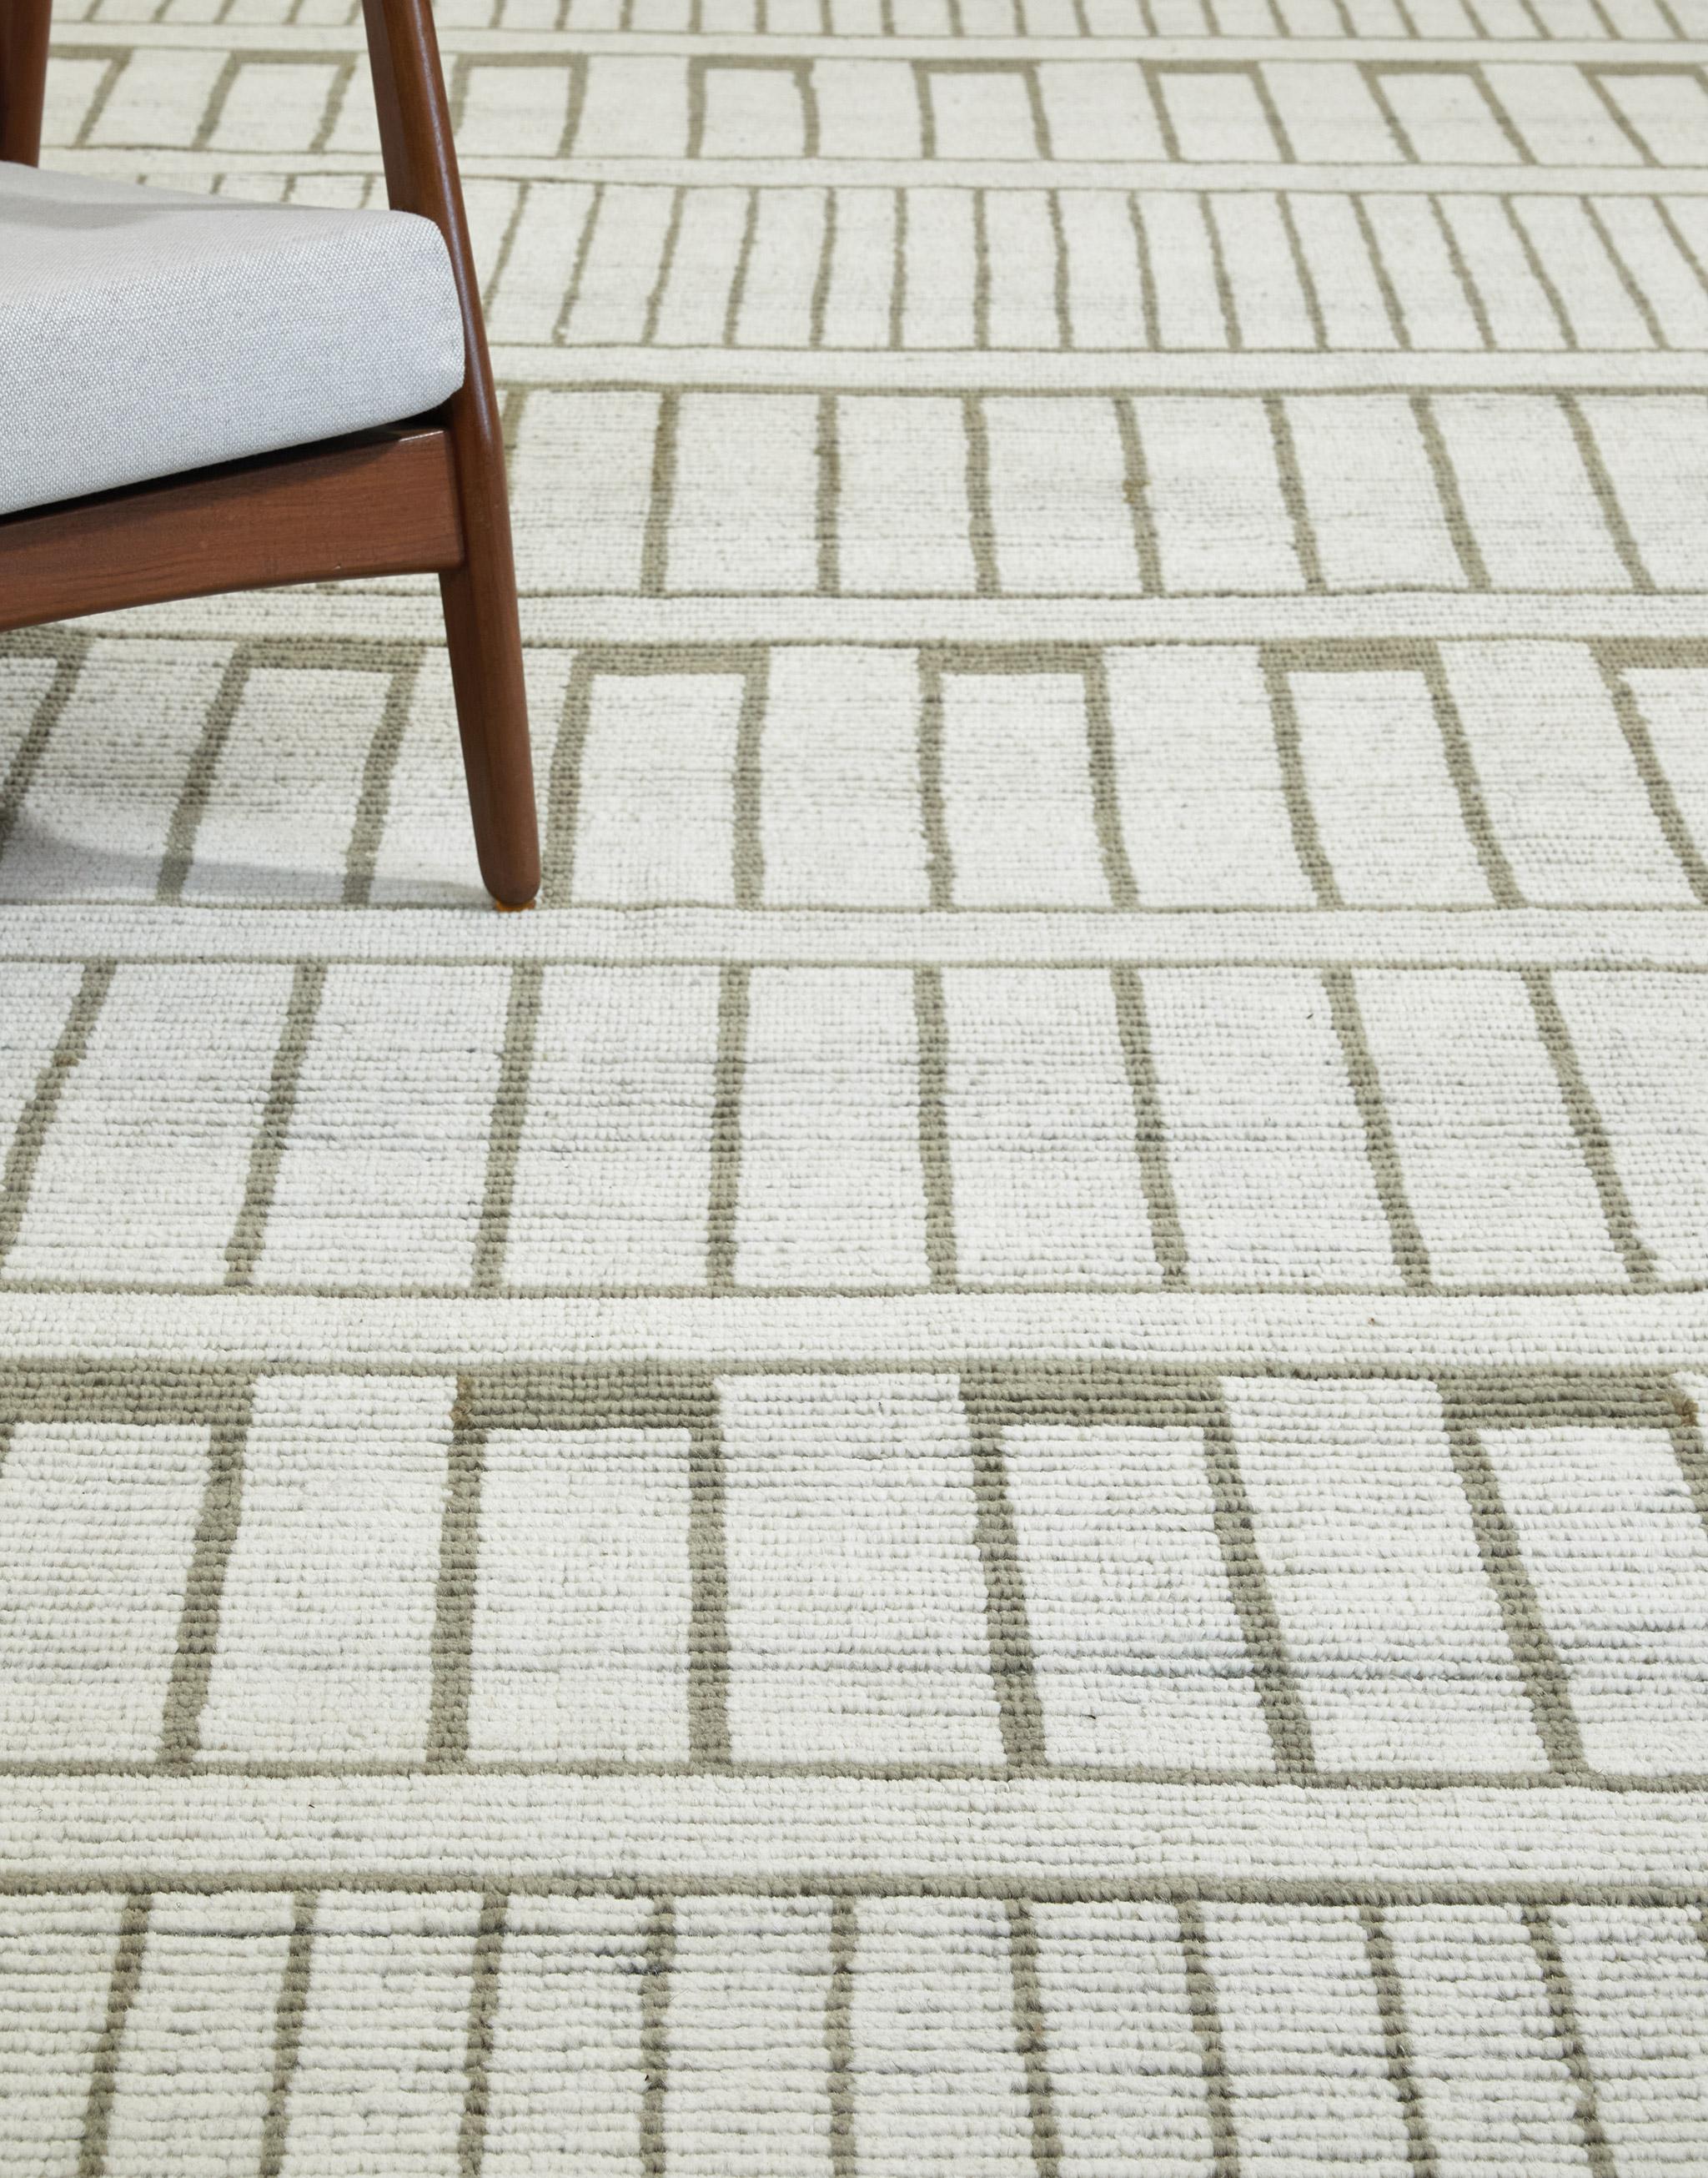 Nebbiolo is a geometric design rendered in trim knots with a contrasting flatweave underlay. Its near-ordered motif conjures fluting, dentils, bookshops…

Here in a ivory with olive.

The Estancia Collection by Mehraban is a group of casually